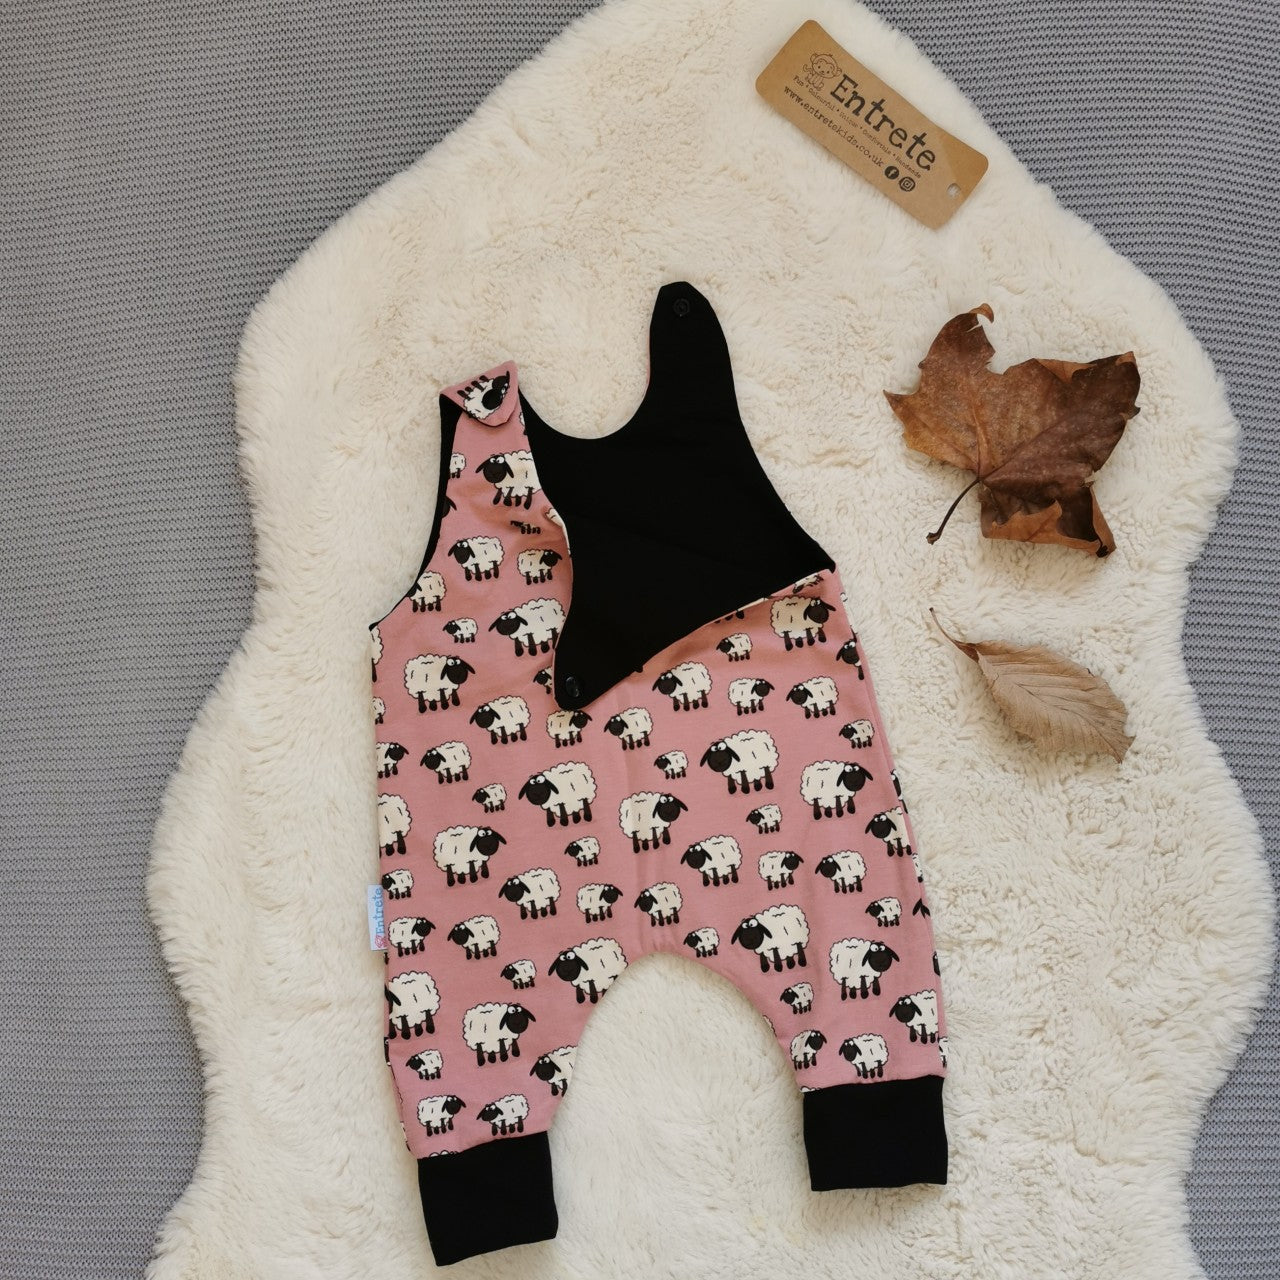 The adorably fun pink sheep romper. Handmade using pink sheep and black cotton jerseys'. Shown with one of the shoulder poppers open.